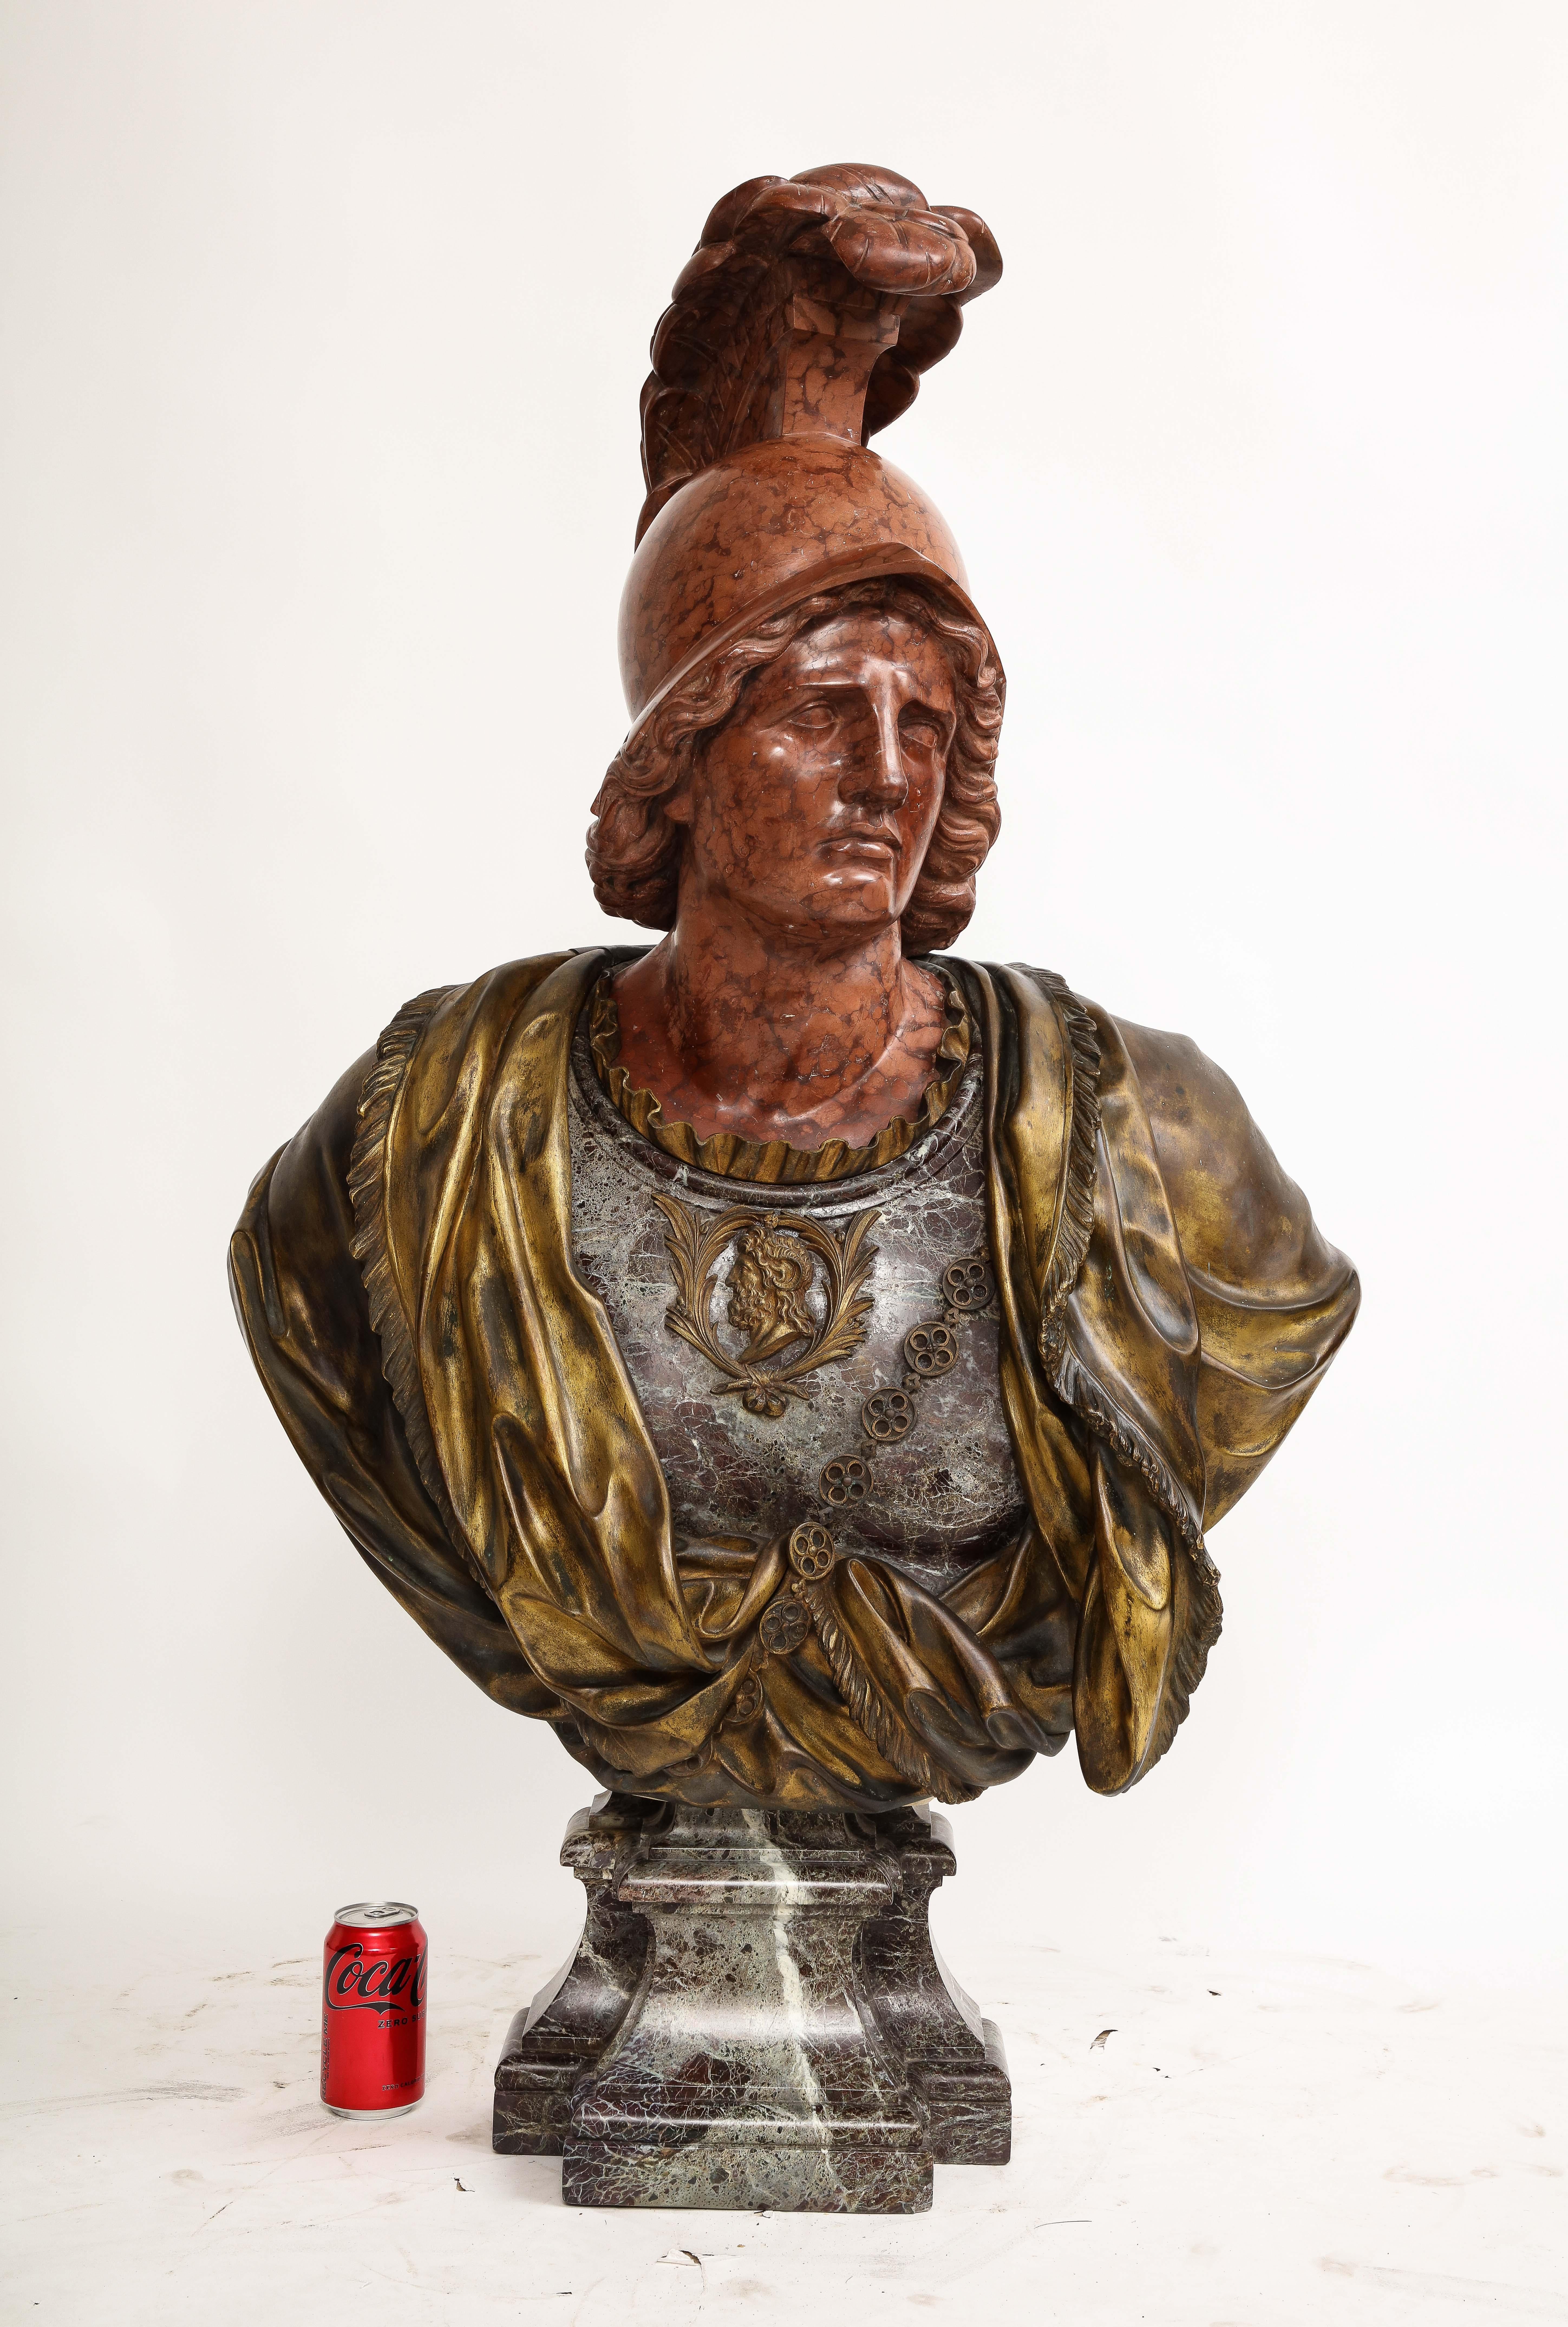 A Monumental and Rare 19th Century French Ormolu Mounted Multi-Marble Bust of Alexander The Great, After The Model by Francois Girardon.  Drawing inspiration from the renowned 